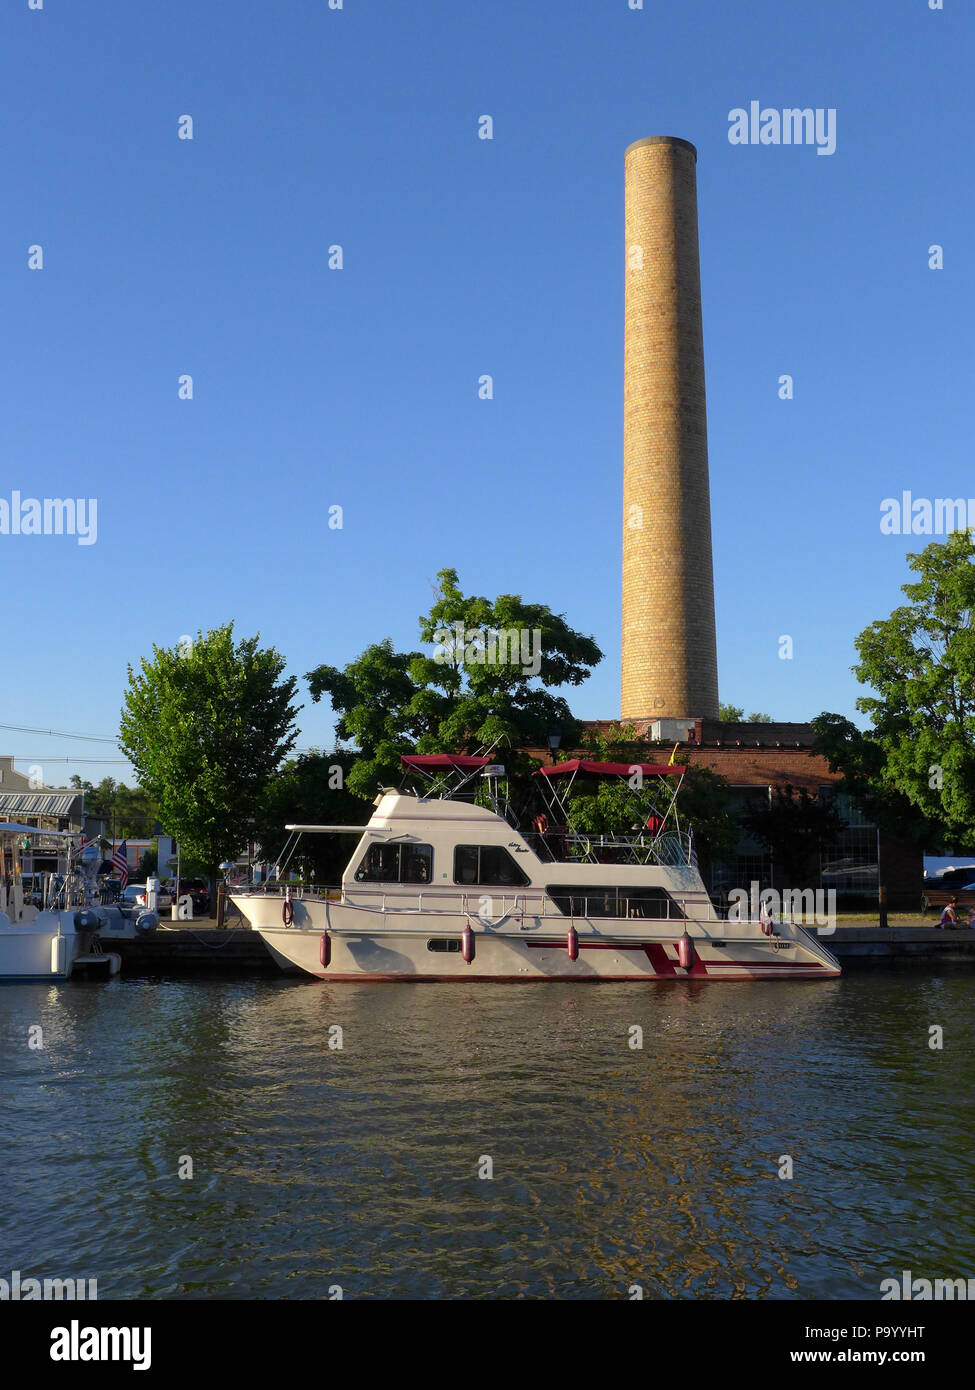 Erie Canal Scenes a Fairport NY Foto Stock